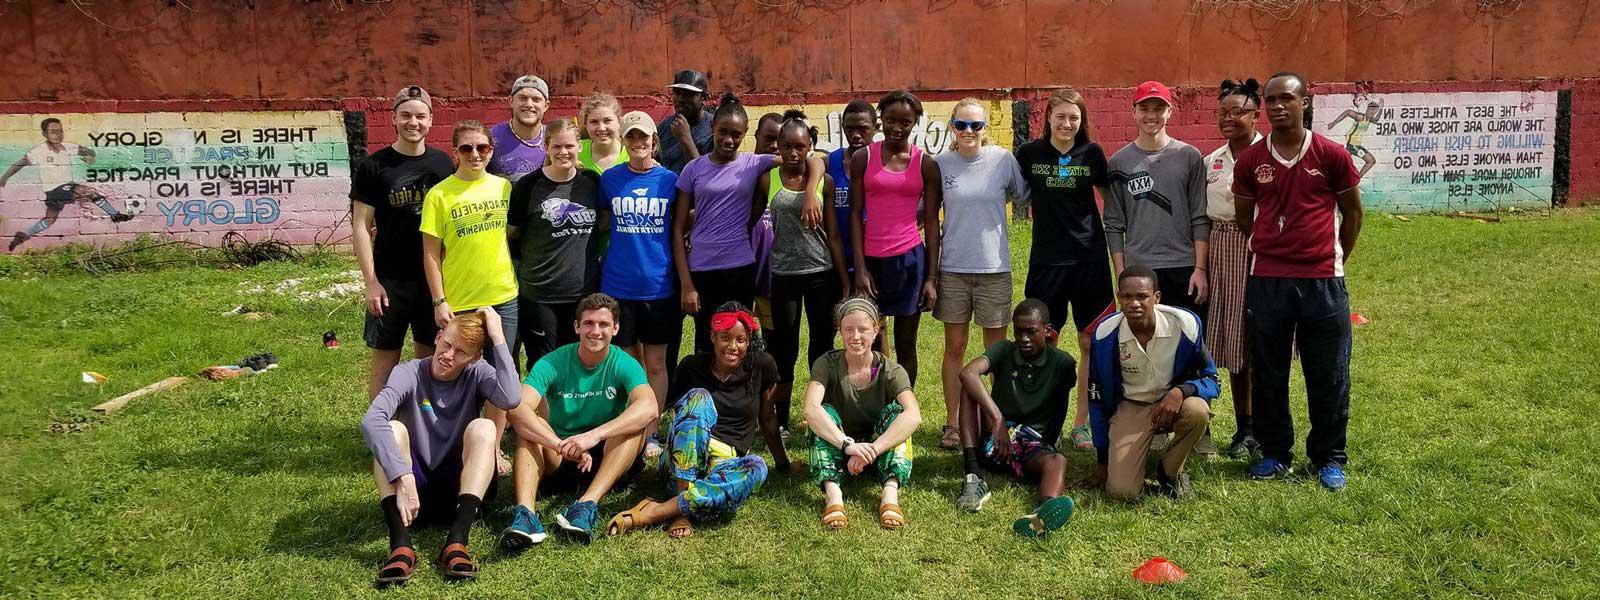 SBU students pose for photo with group of kids in Dominican Republic